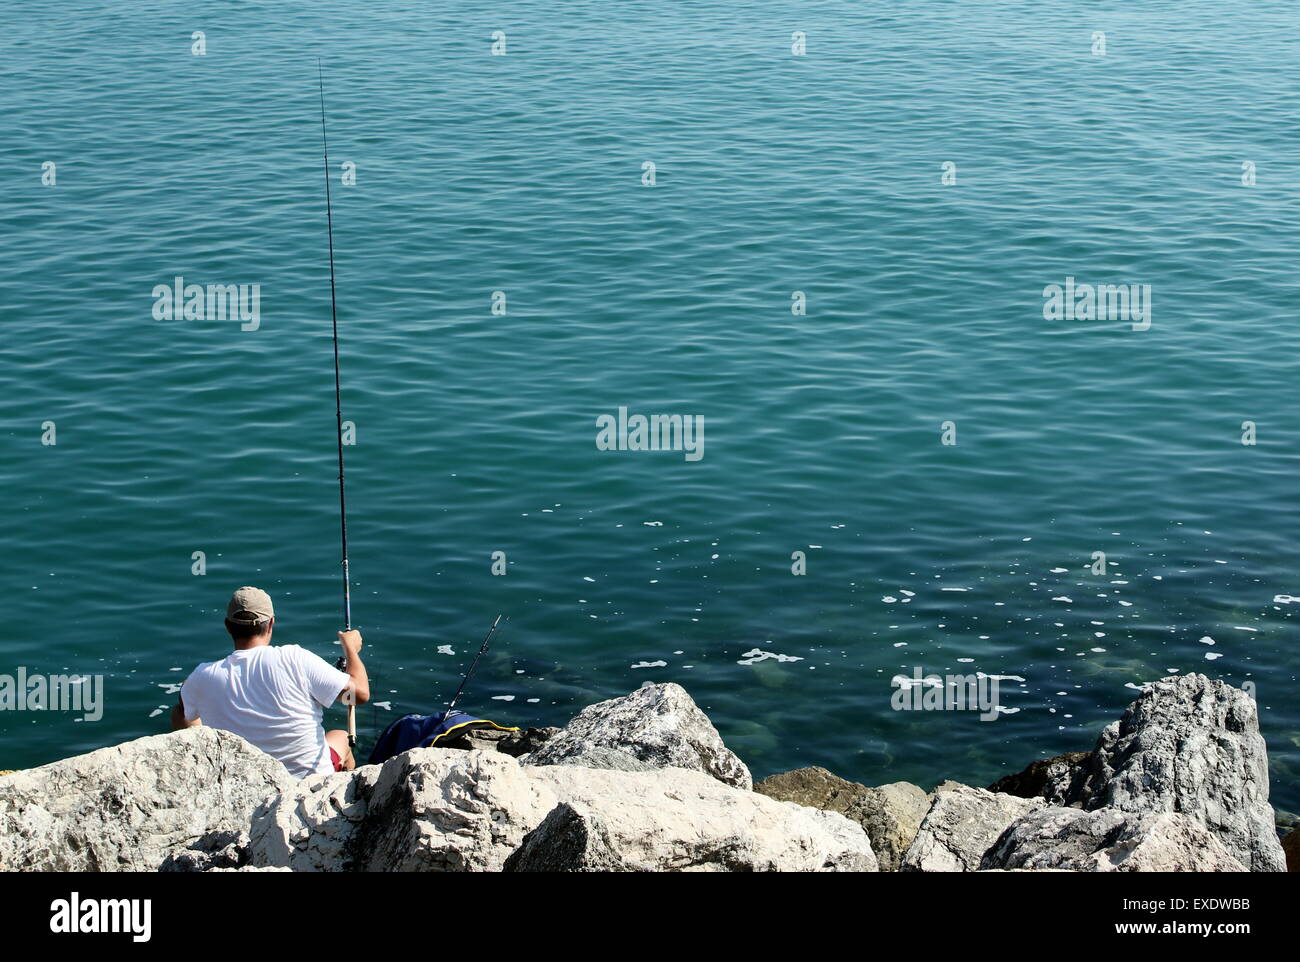 A man, a fisherman, is above the large rock placed near the sea. Stock Photo